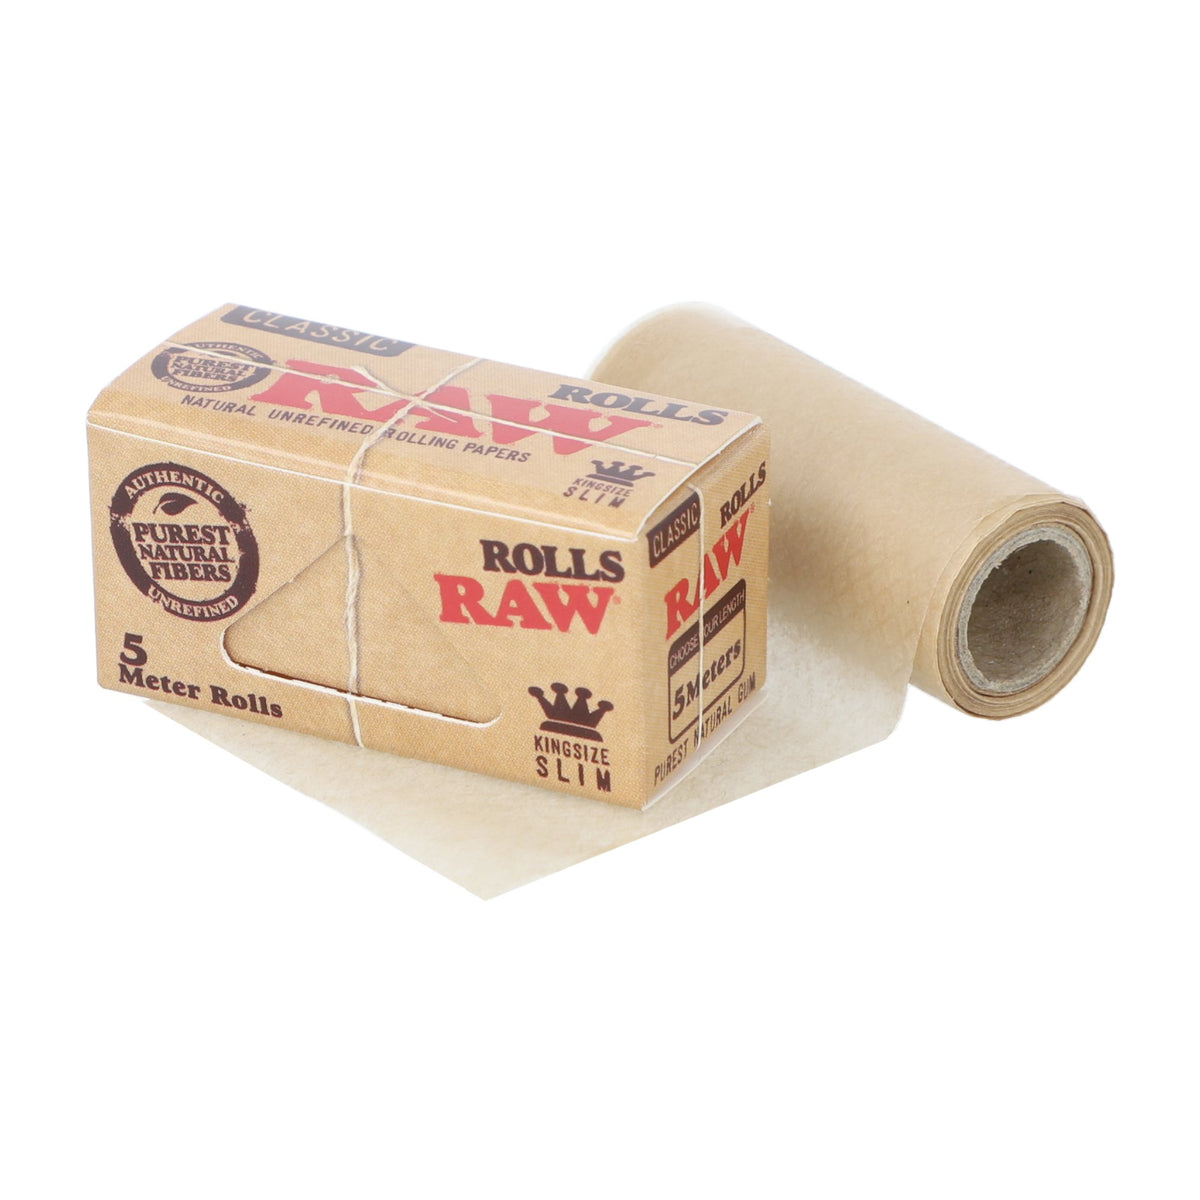 RAW Classic Paper Rolls King Size Slim - 5 Meters Rolling Papers WAR00344-1/24 esd-official